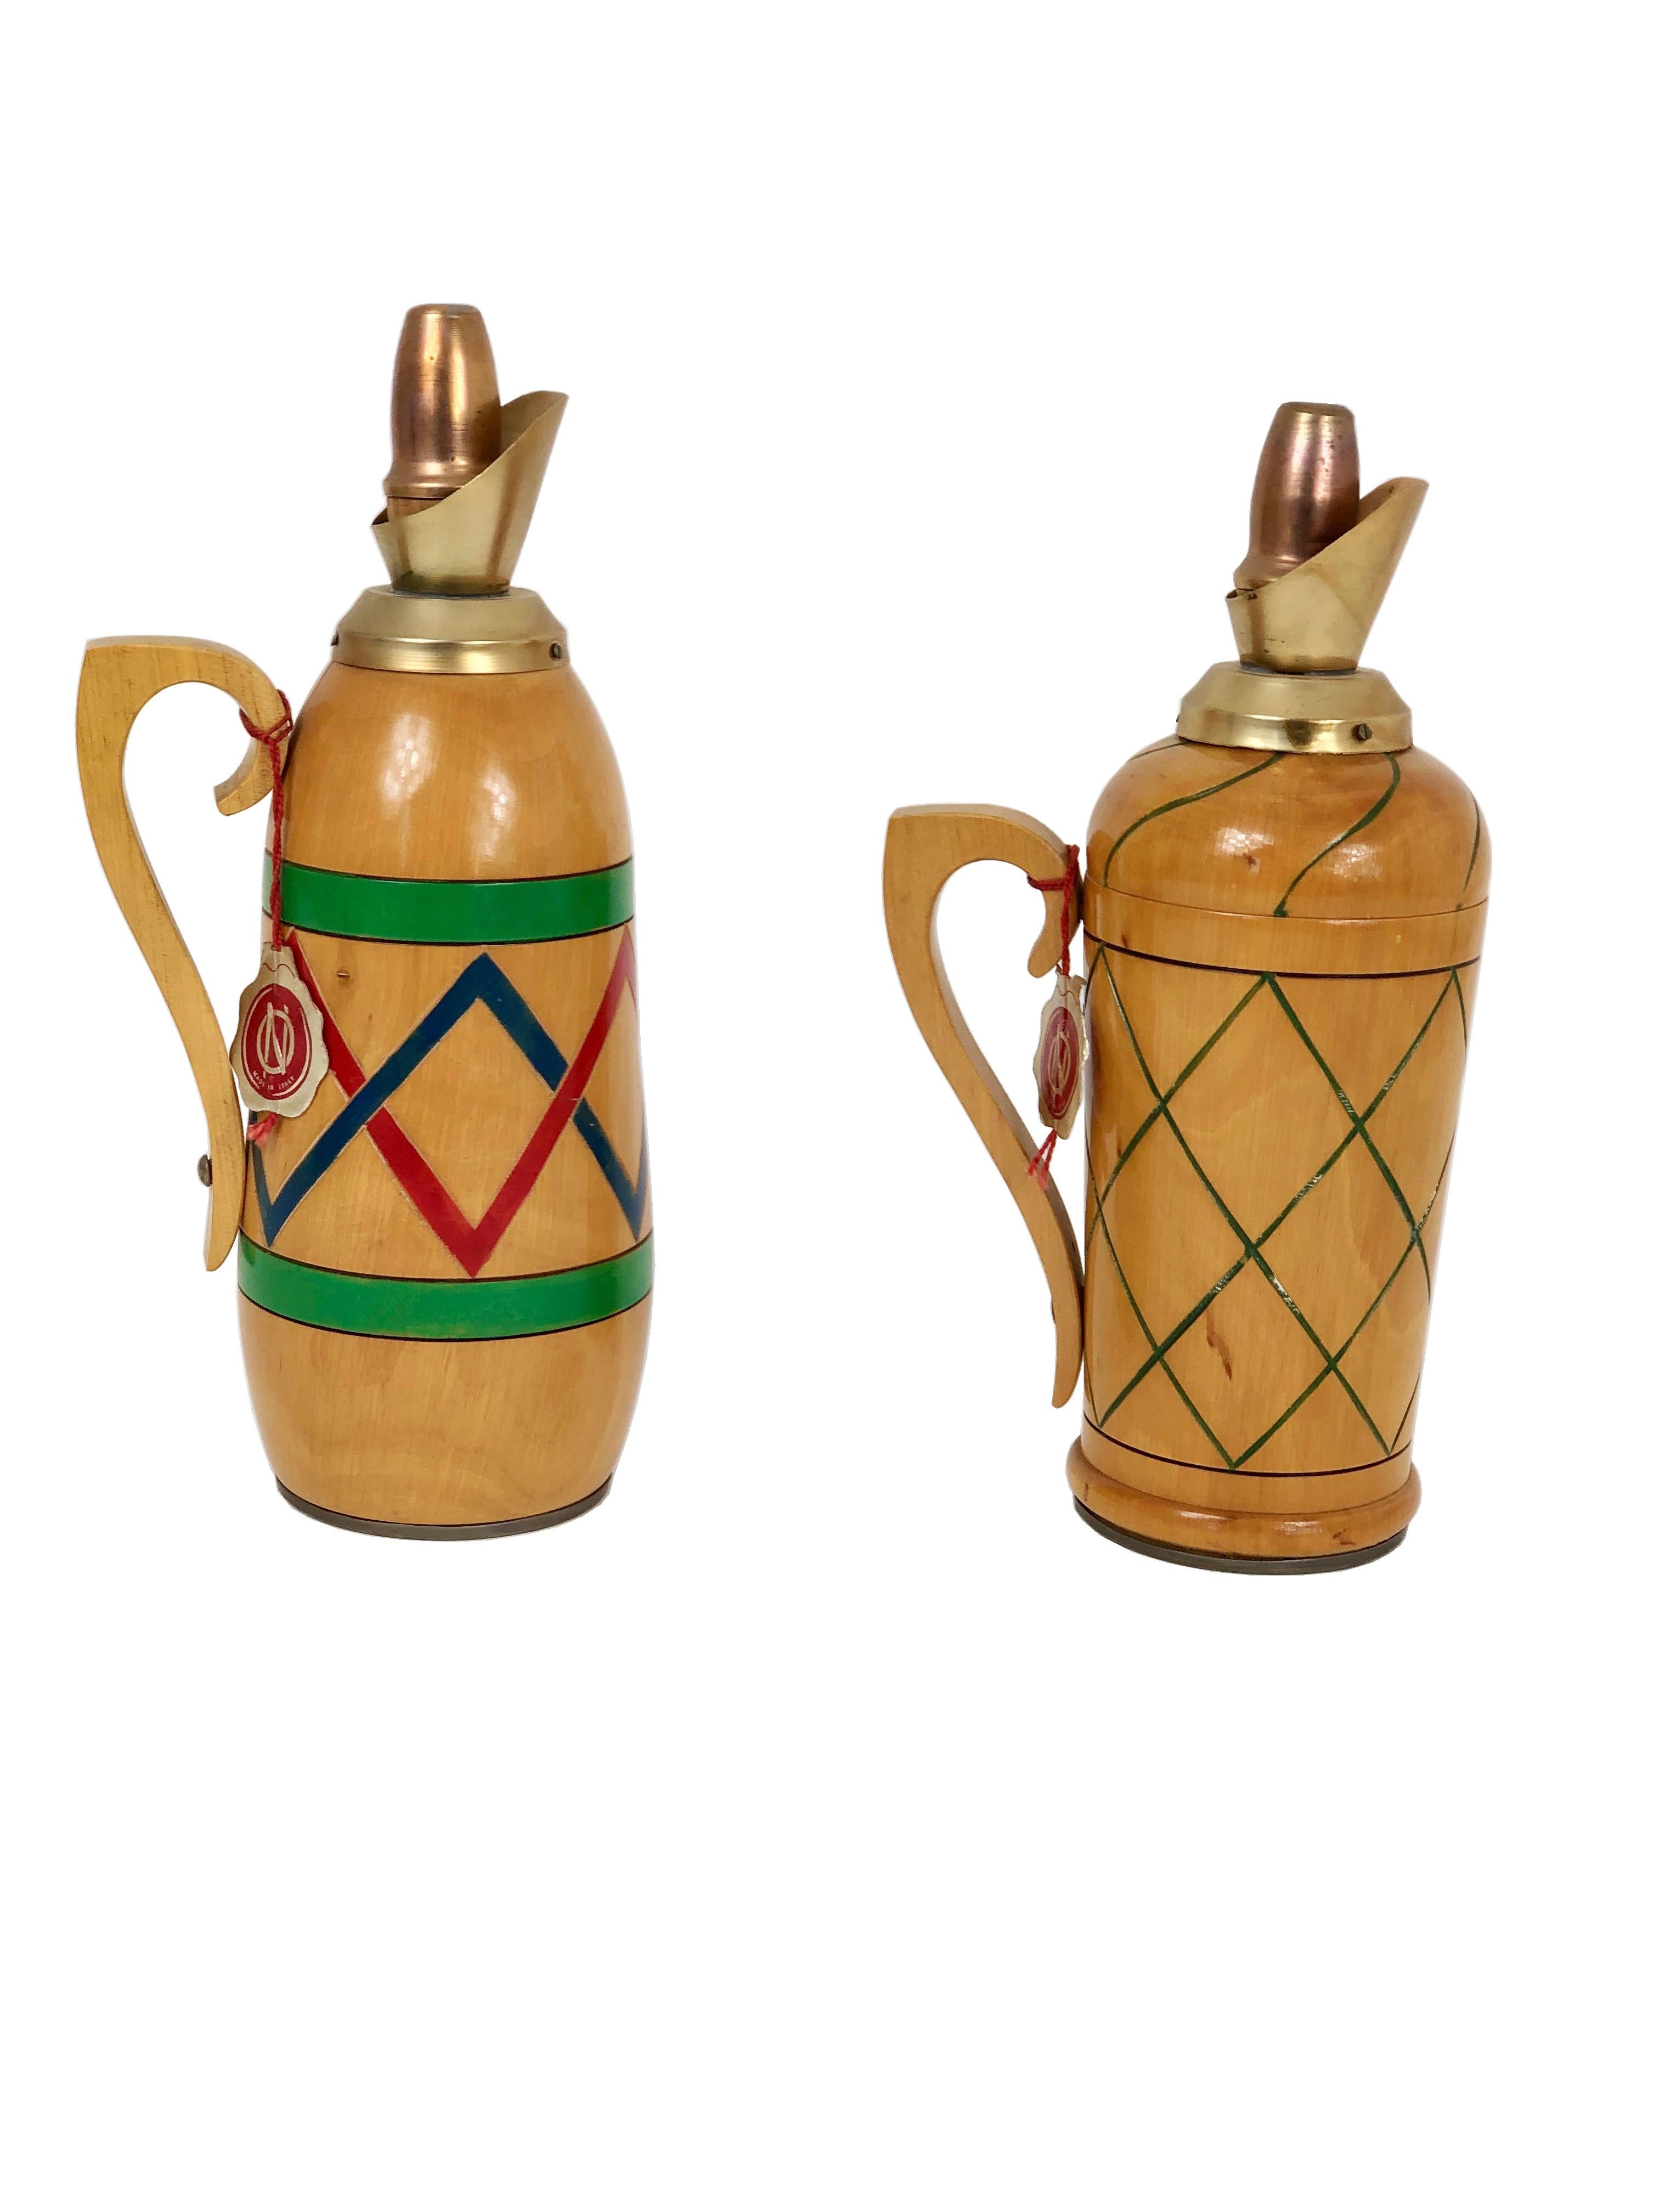 Two vintage pitchers in wood featuring handles in Art Decò style, with its original label 